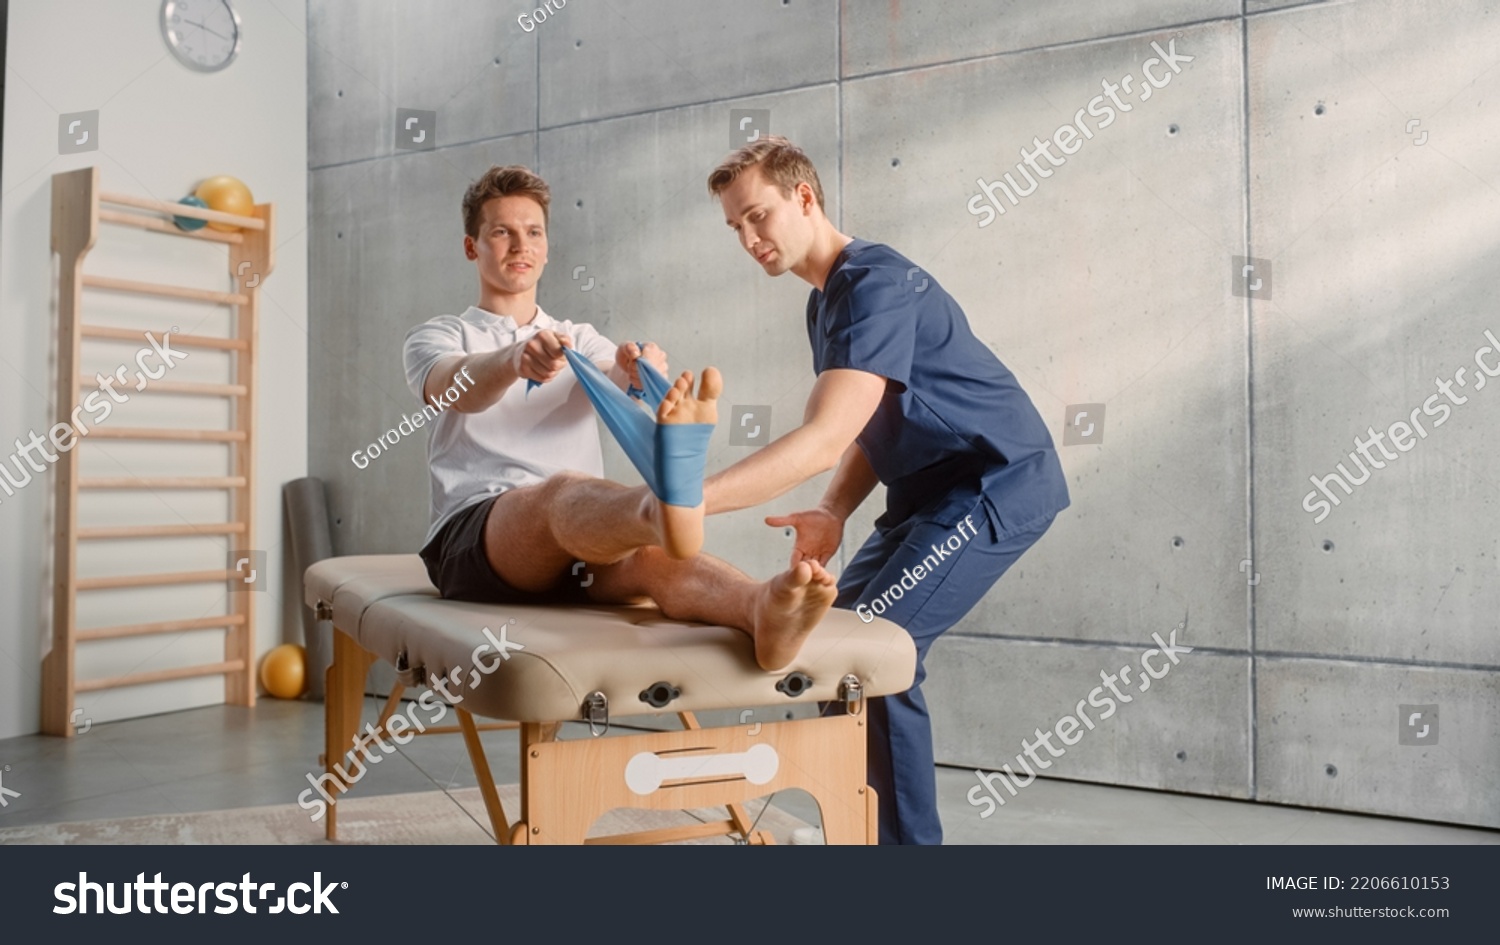 Young Male Athlete Undergoing Physiotherapy, Professional Sport Masseur Helping with Foot Exercise with a Rubber Band. Musculoskeletal Pain Therapy and Rehabilitation in Modern Clinic Concept. #2206610153